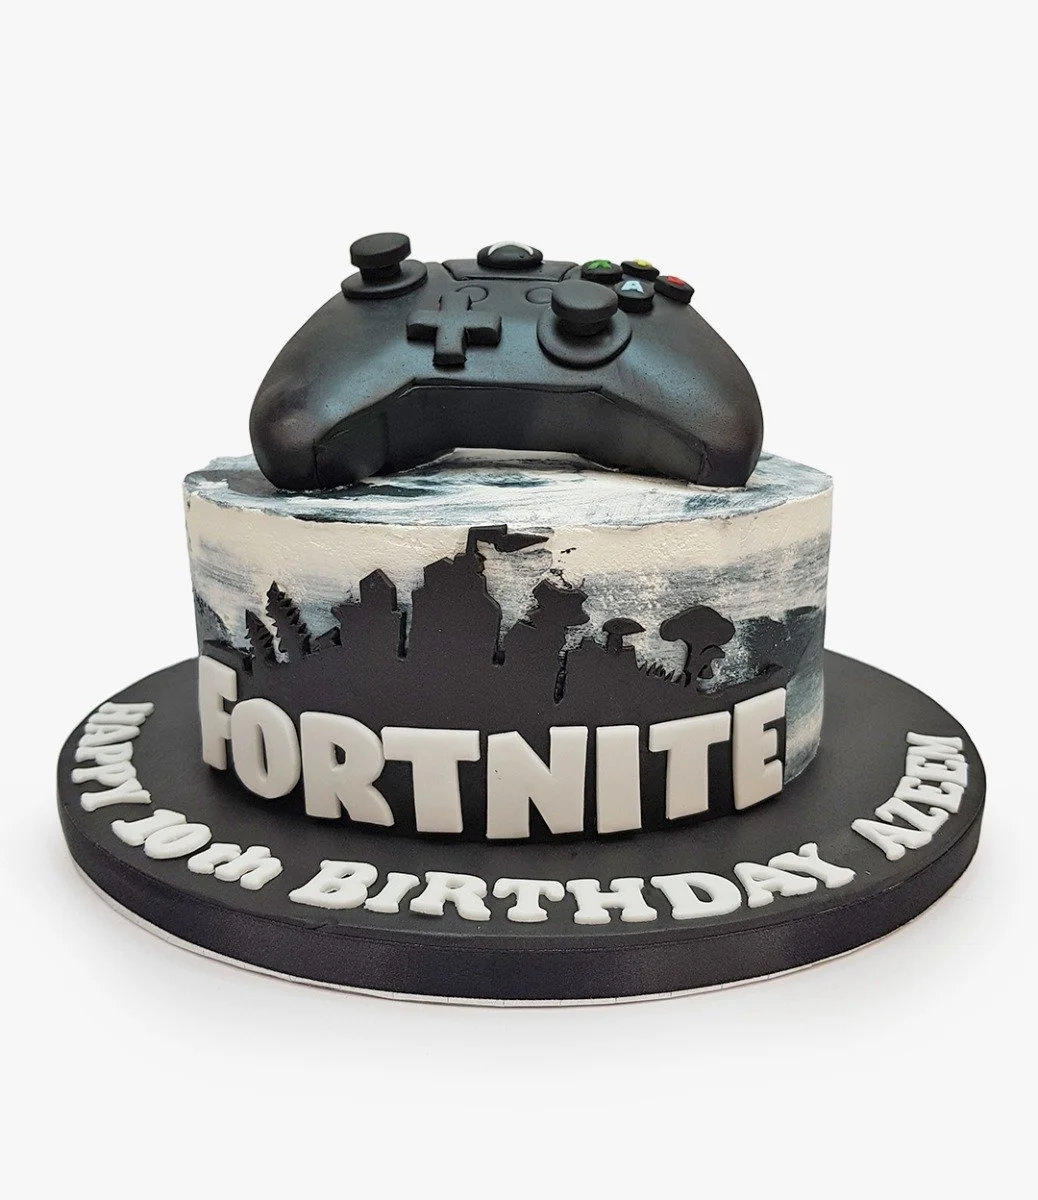 Fortnite With Xbox Controller By Cake Social